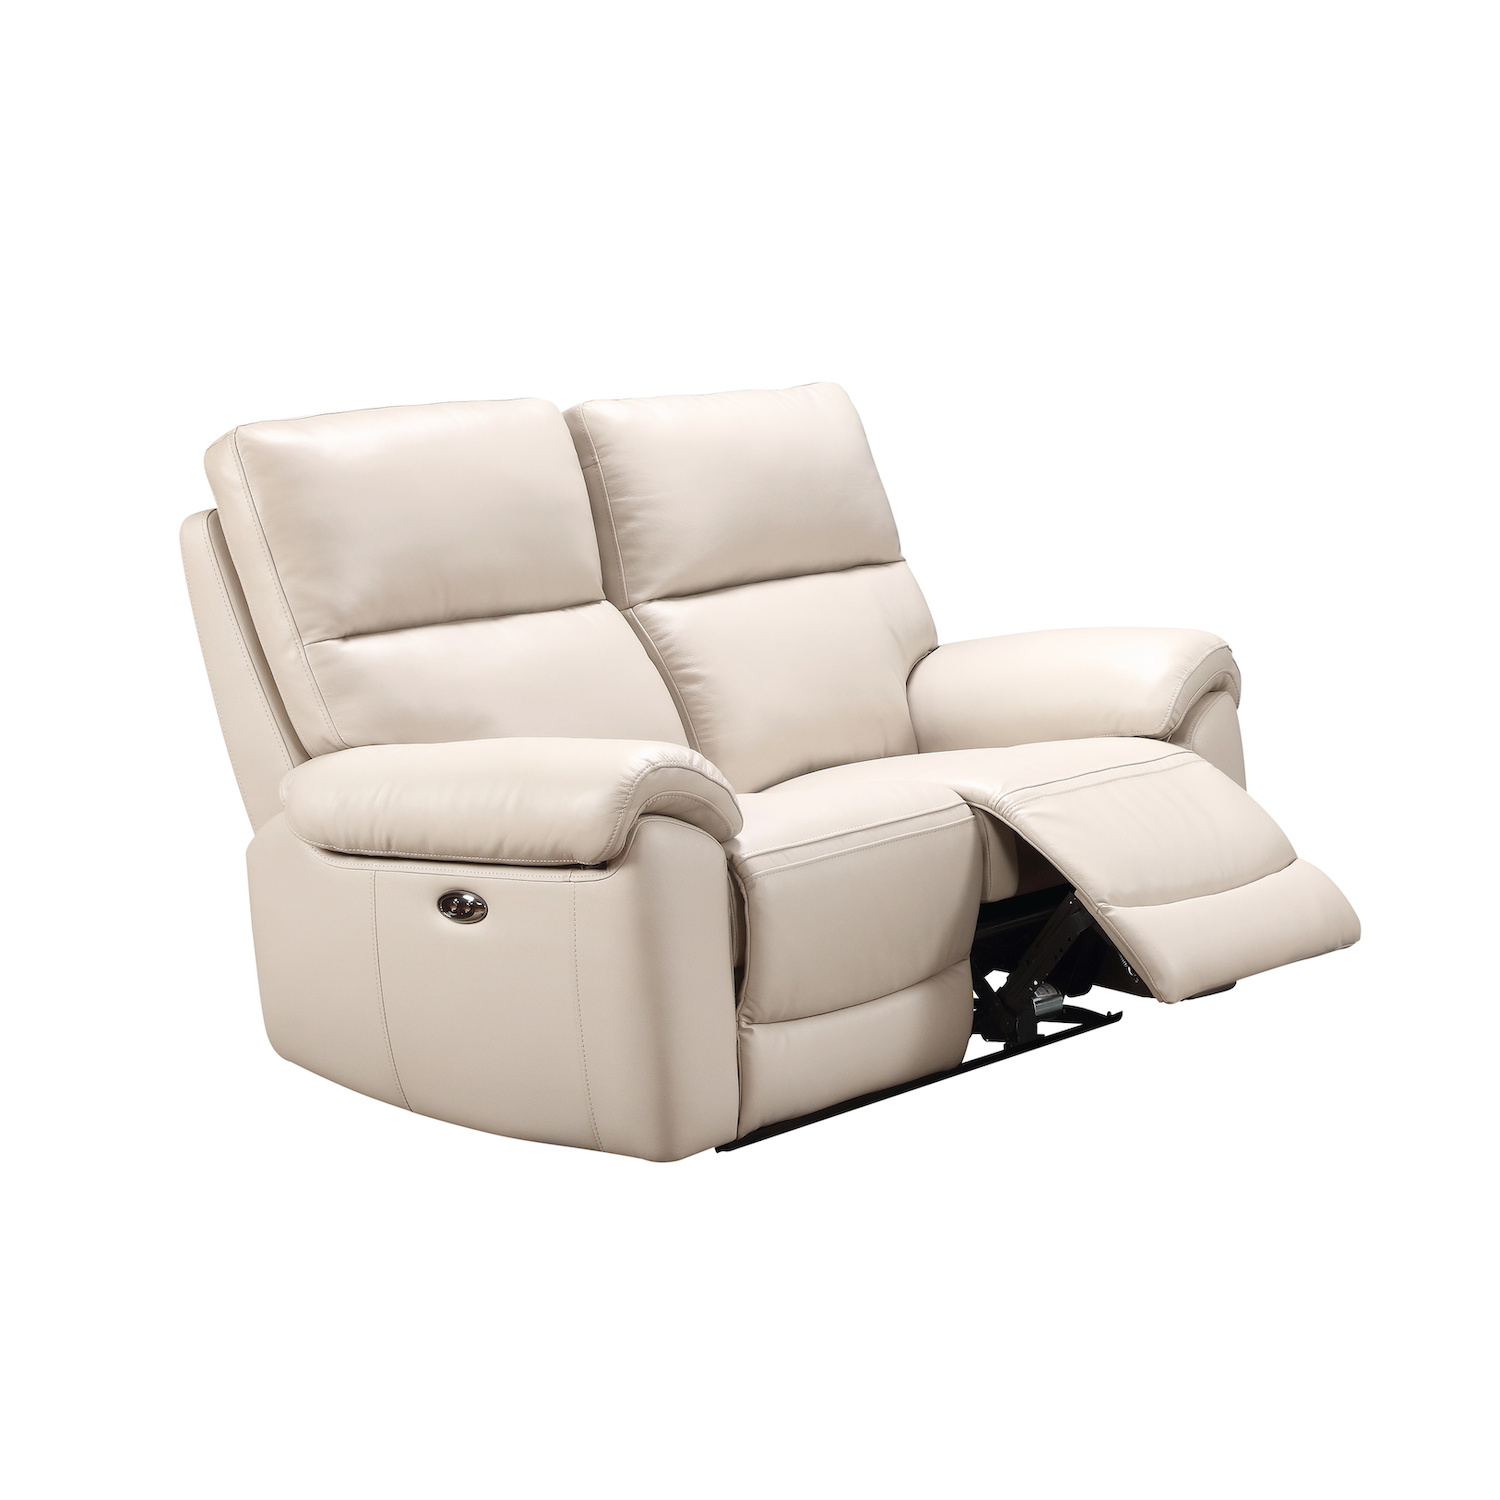 Rocco 2 Seater Power Recliner Sofa Chalk Leather